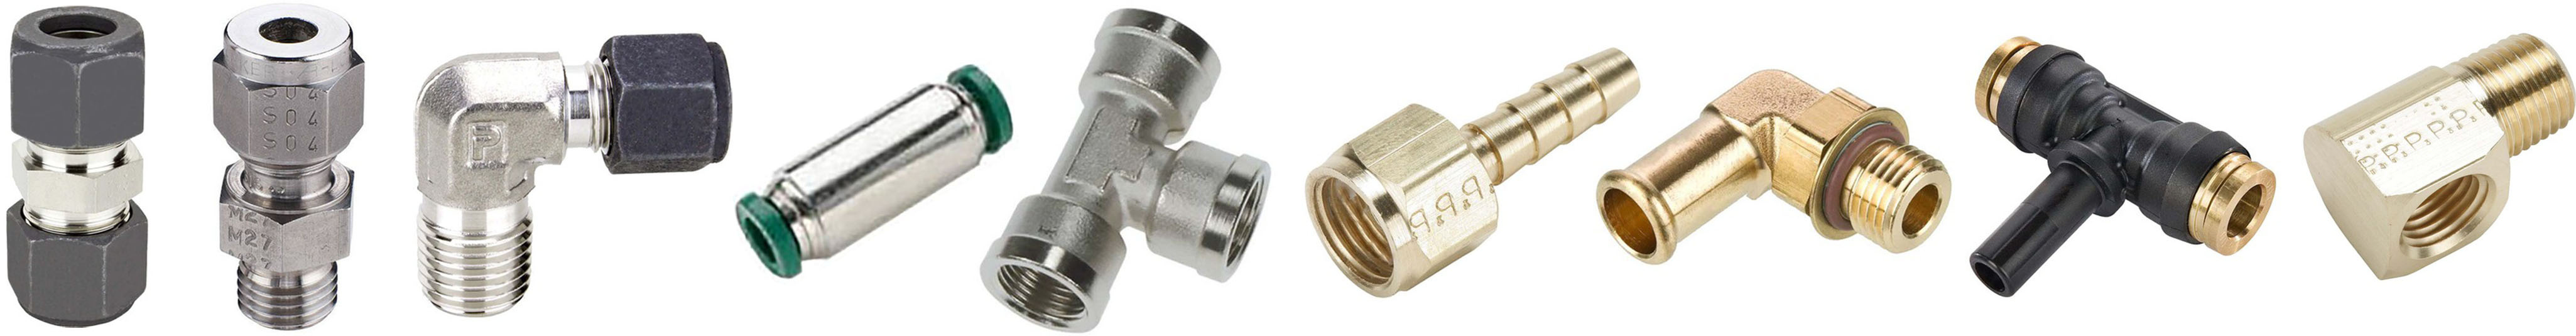 pneumatic-fittings-family-photo